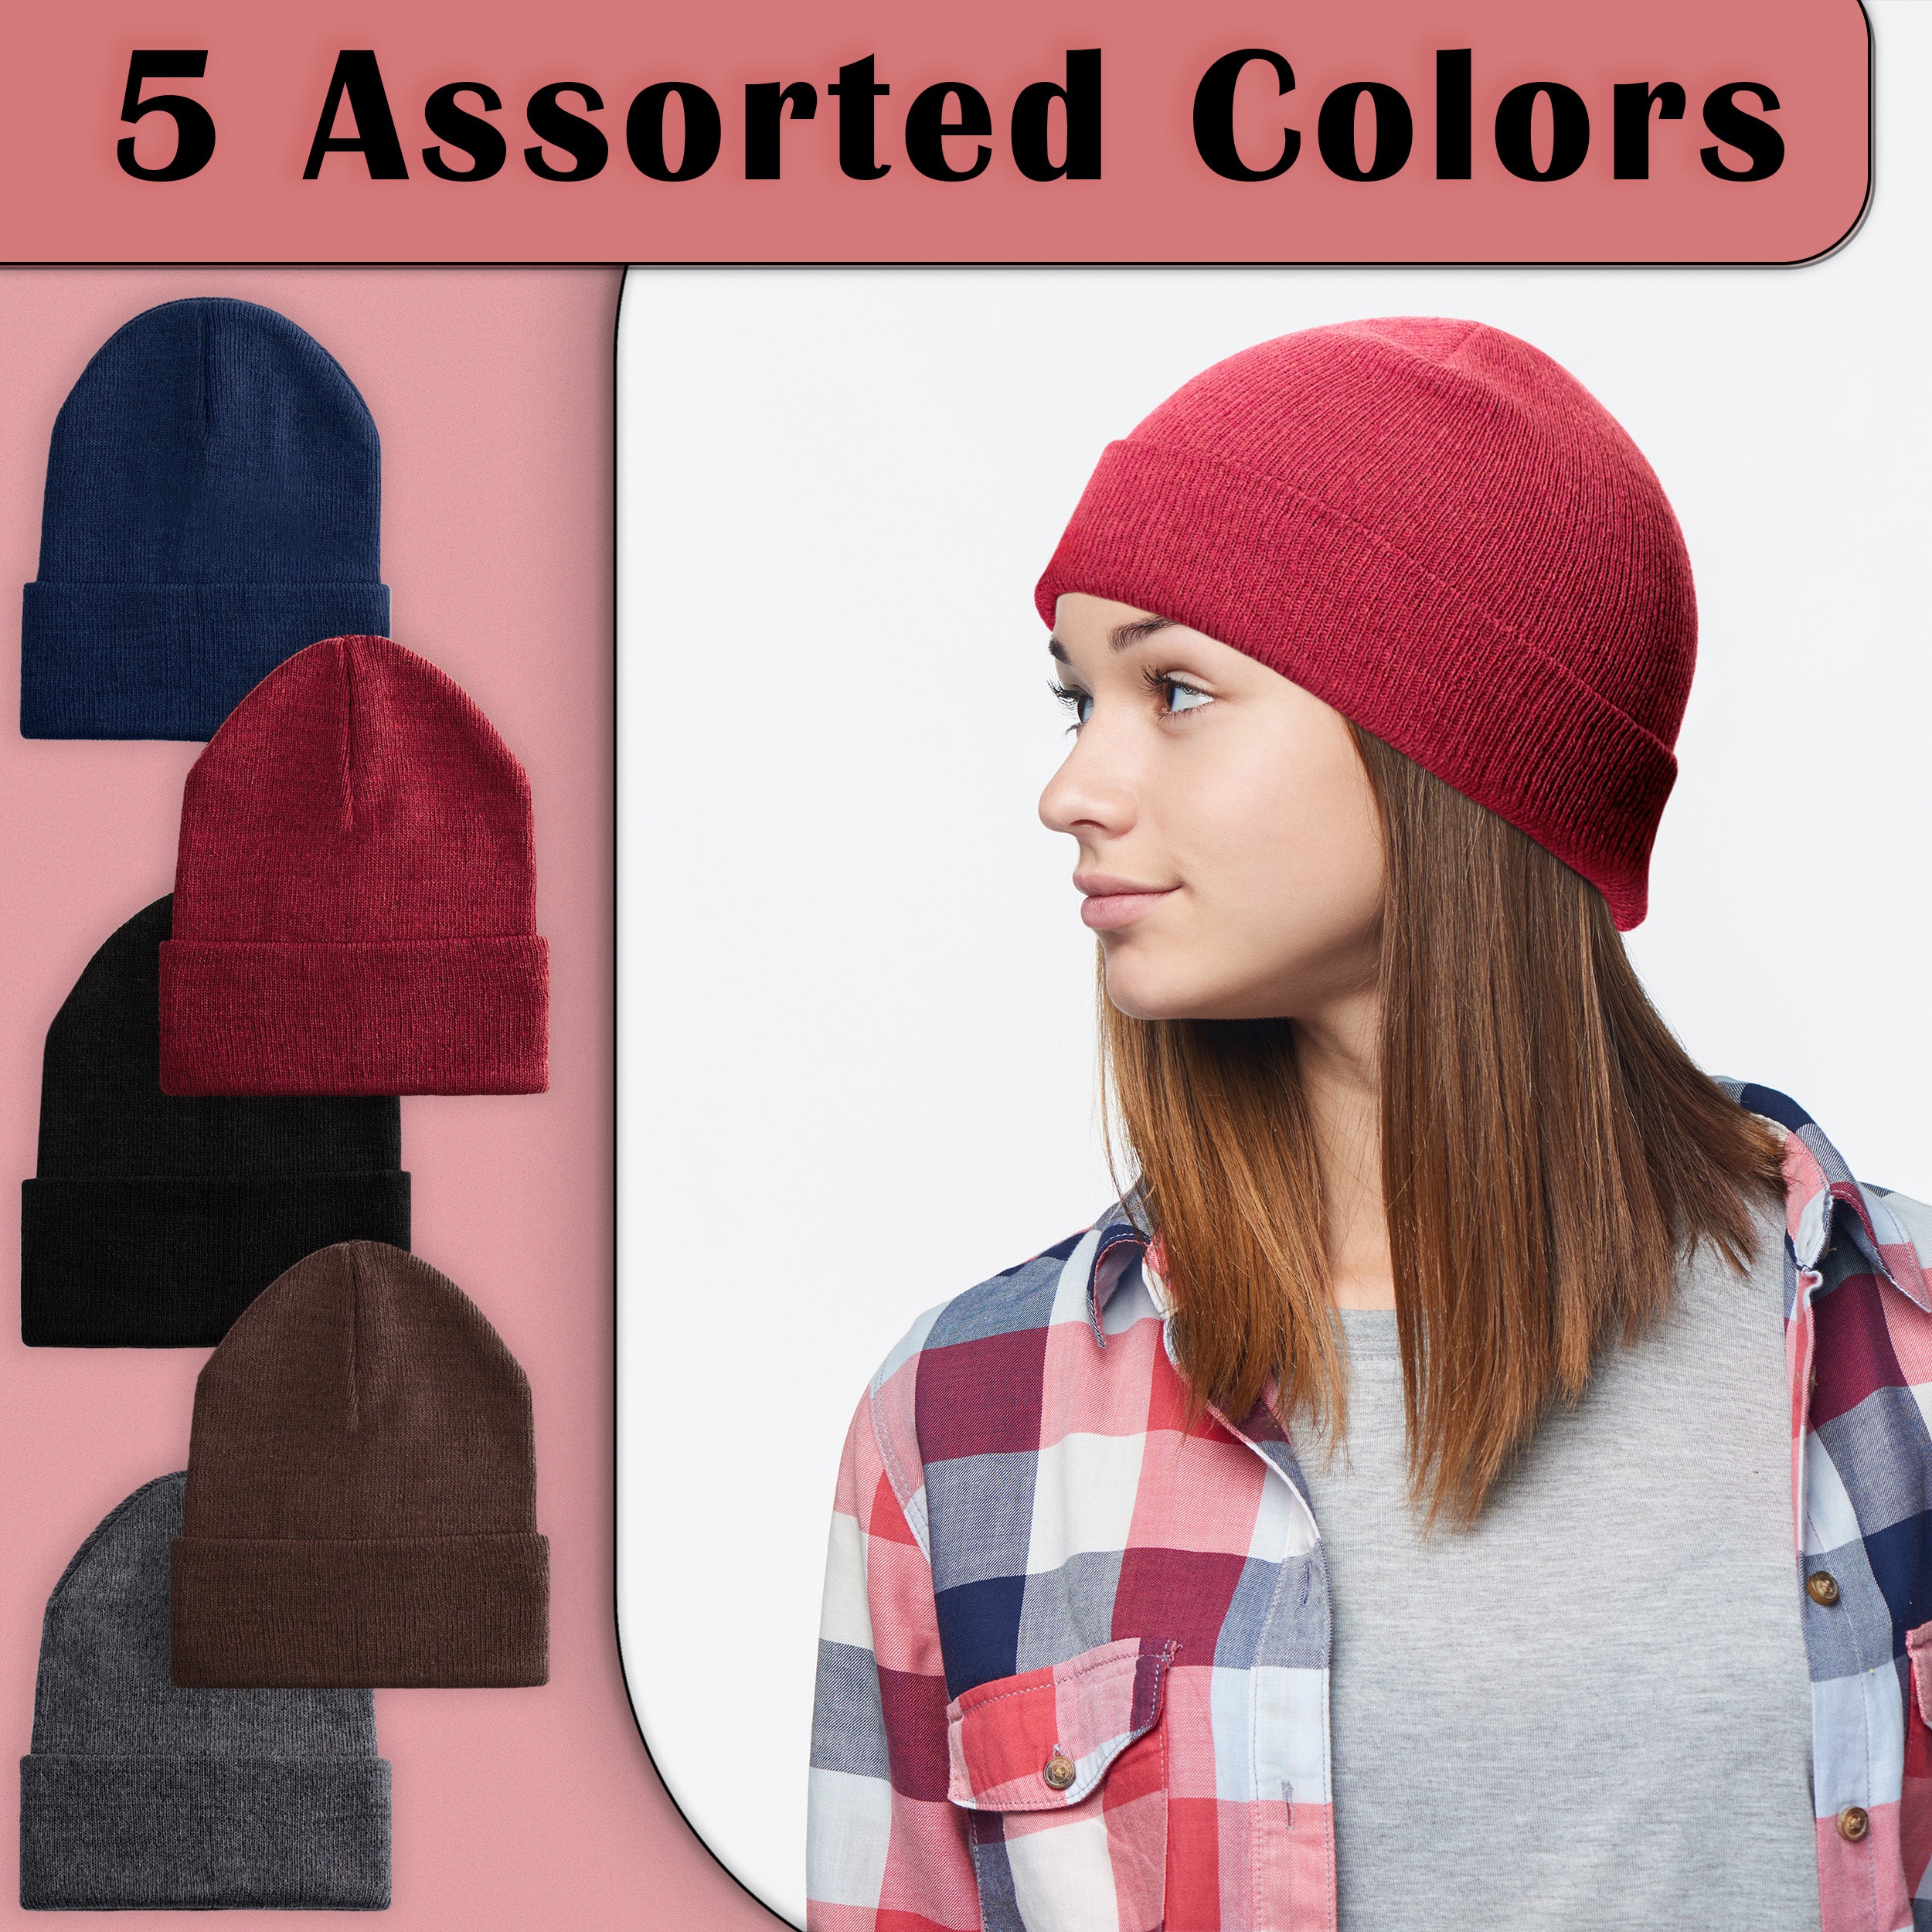 24 Set Wholesale Beanie, Glove and Scarf Bundle in 5 Assorted Colors - Bulk Case of 24 Beanies, 24 Pairs of Gloves, 24 Scarves